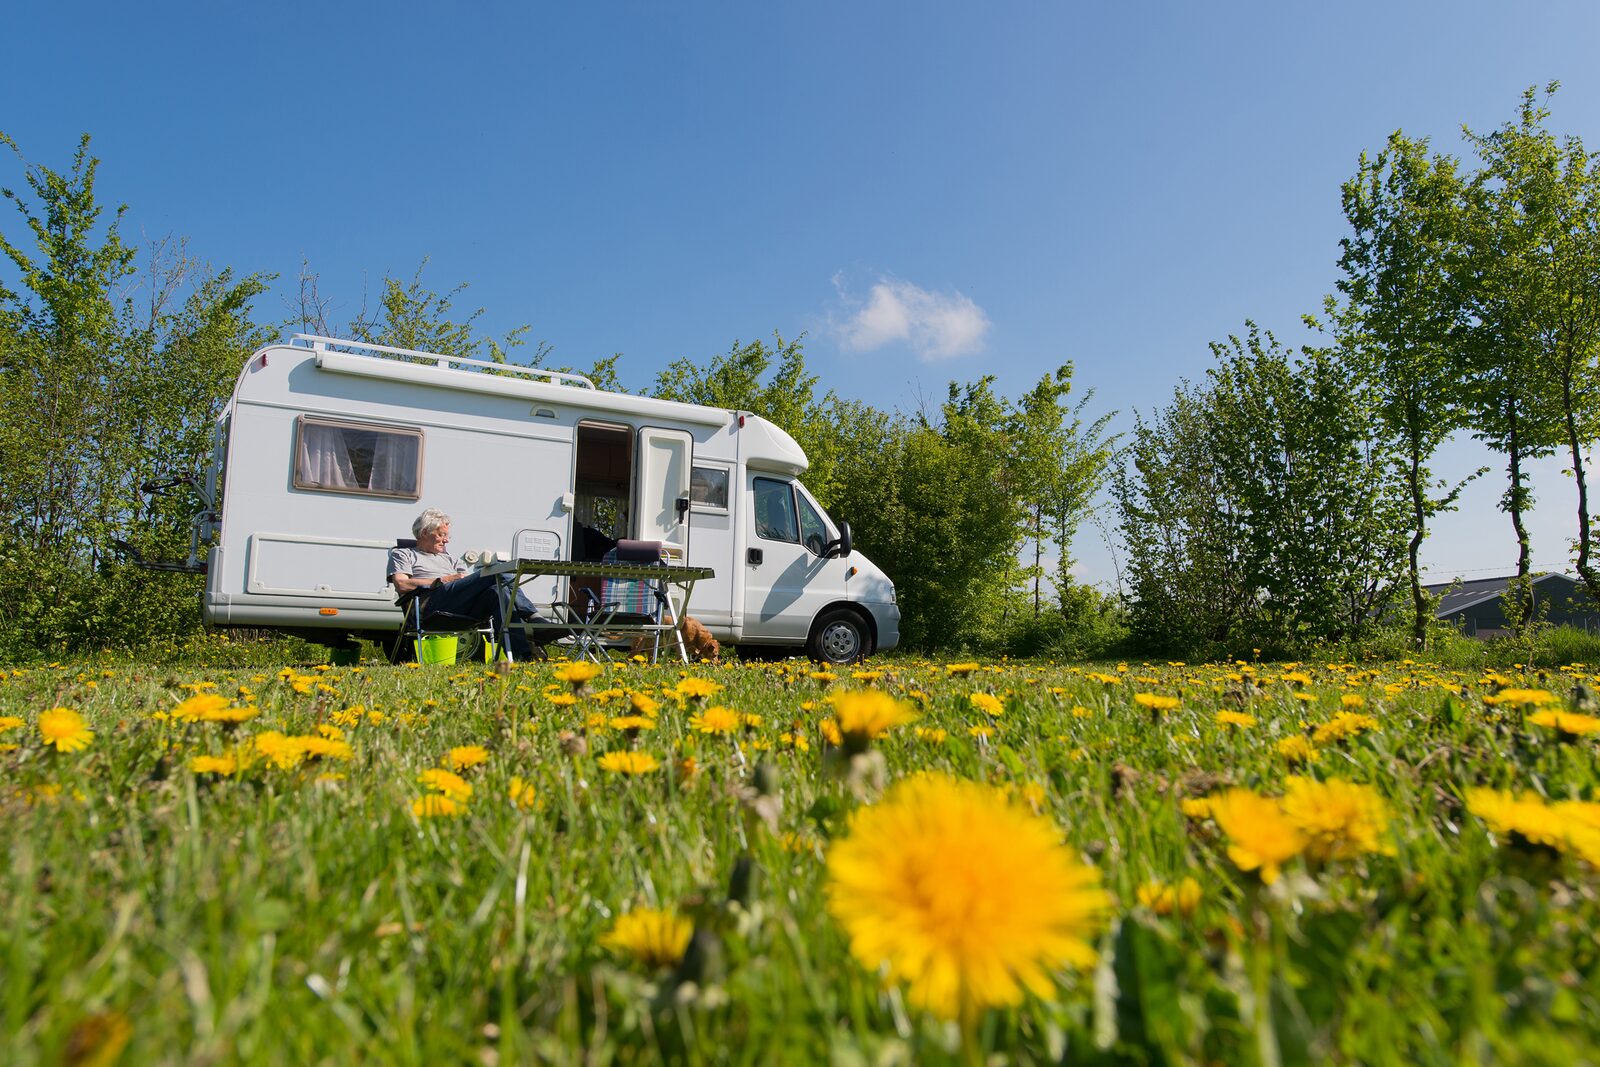 Camping and motorhome pitches